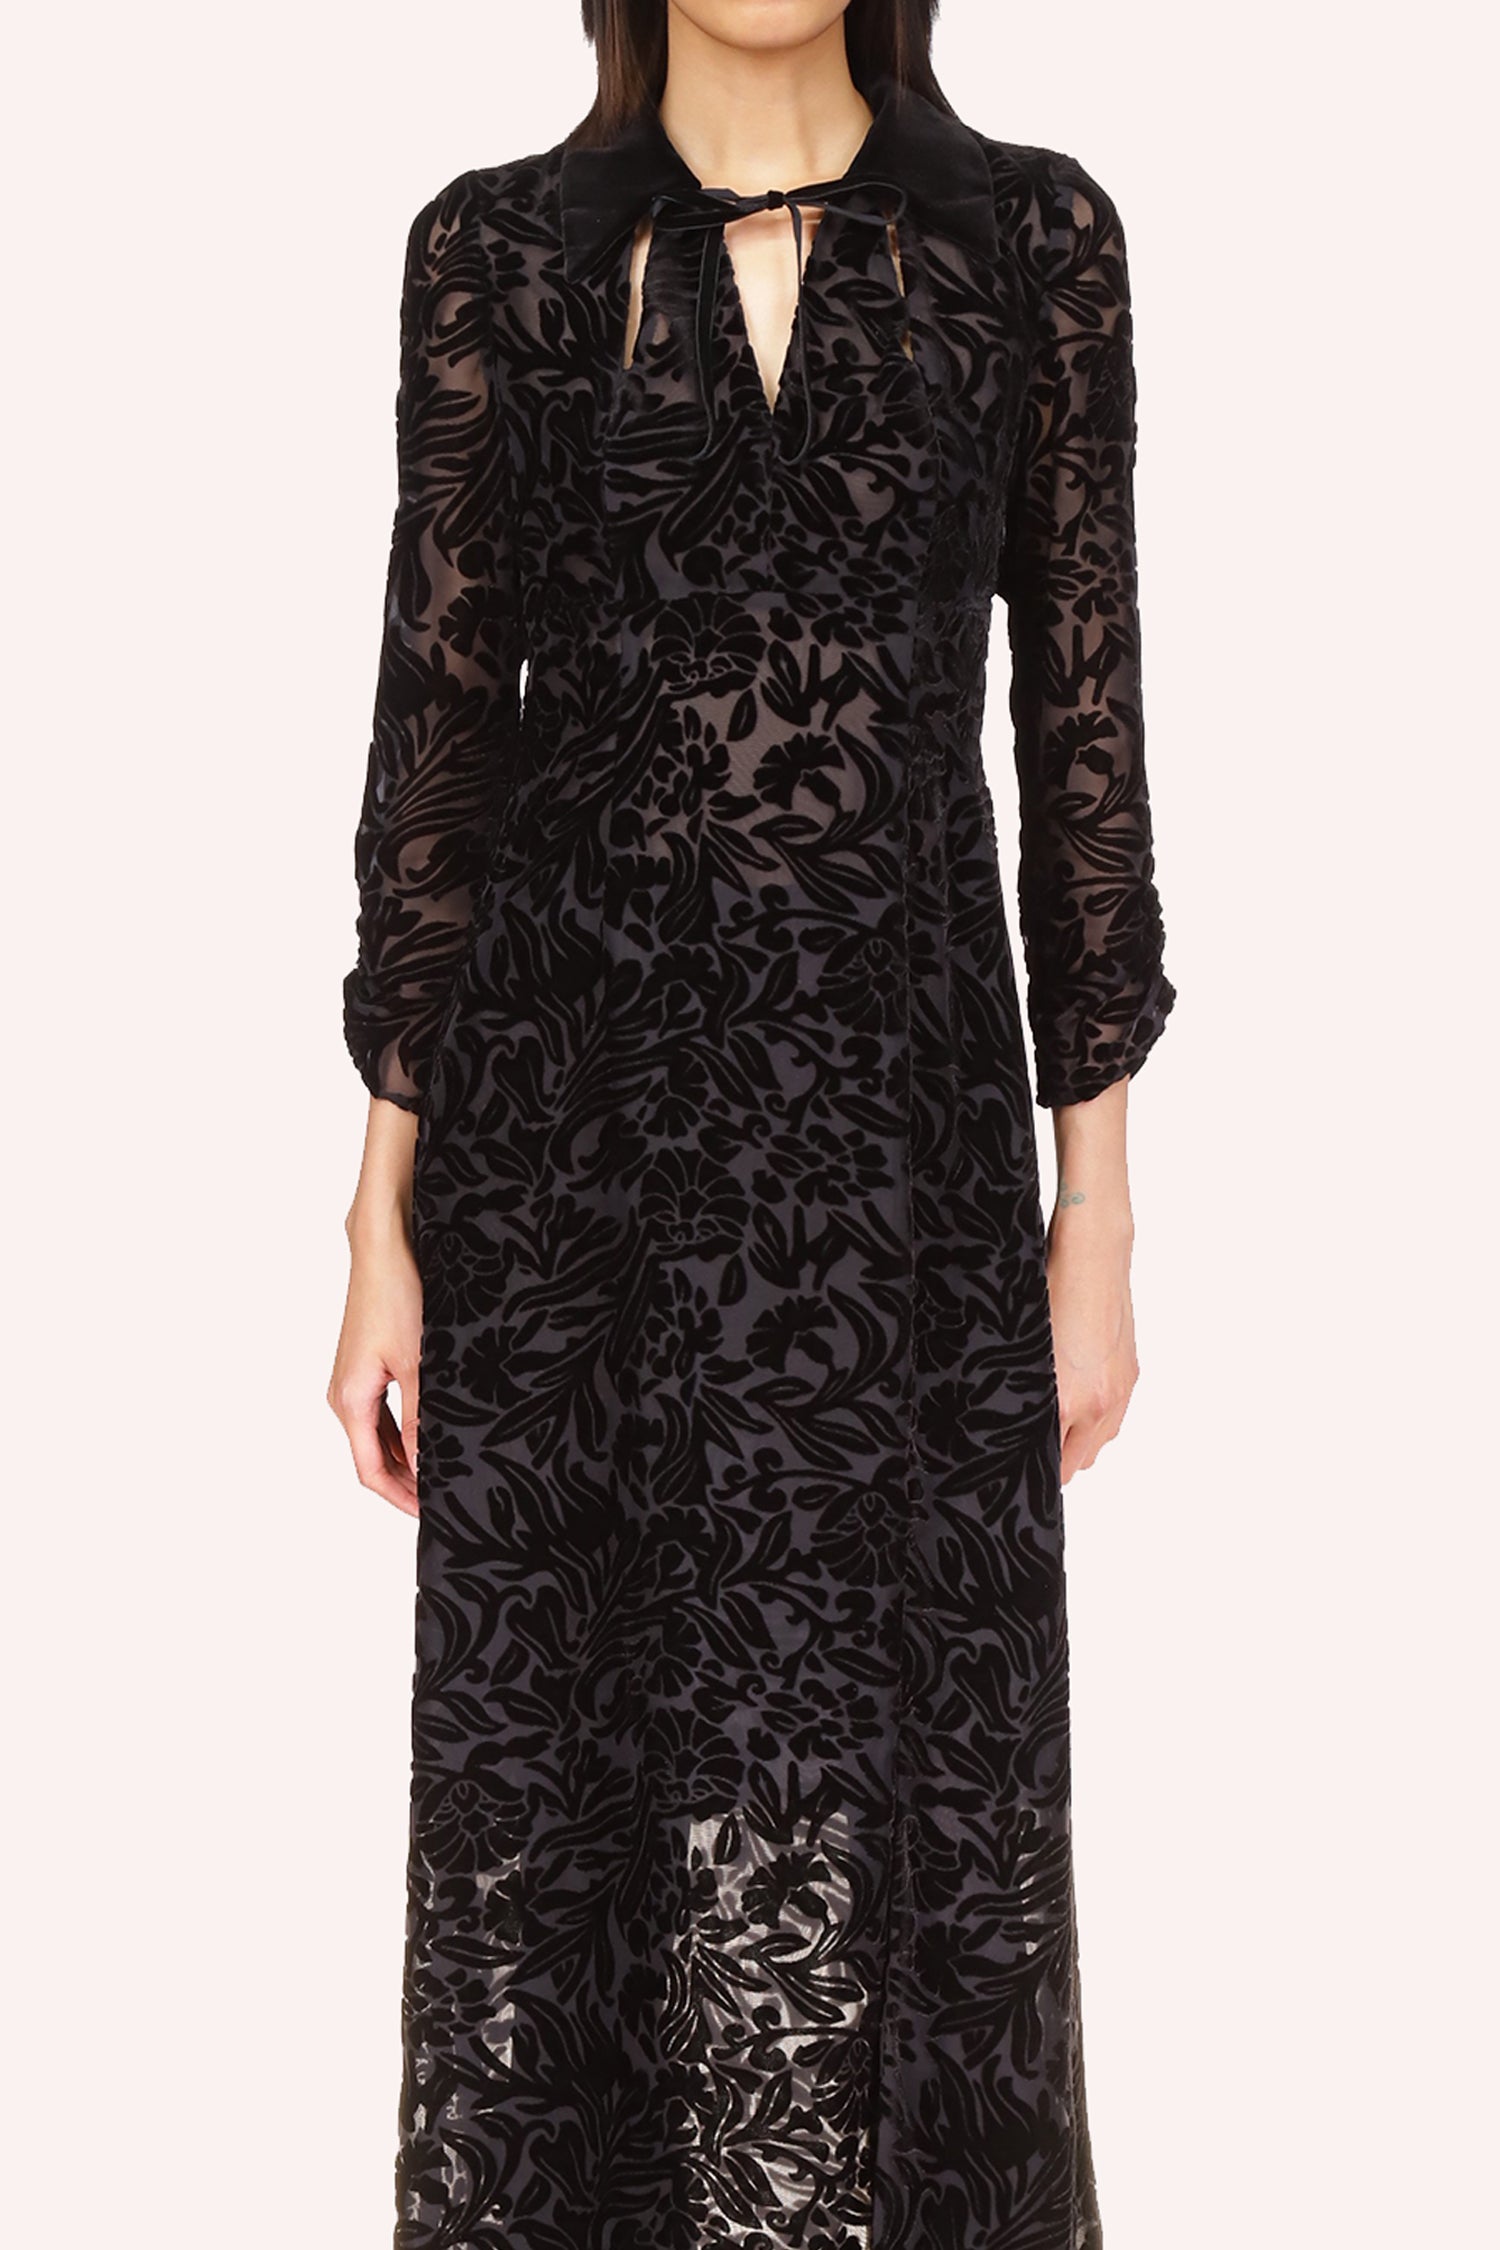 See-thru Floral-patter, V-cut lace collar, two small slits on the bust, and lace-adorned long sleeves